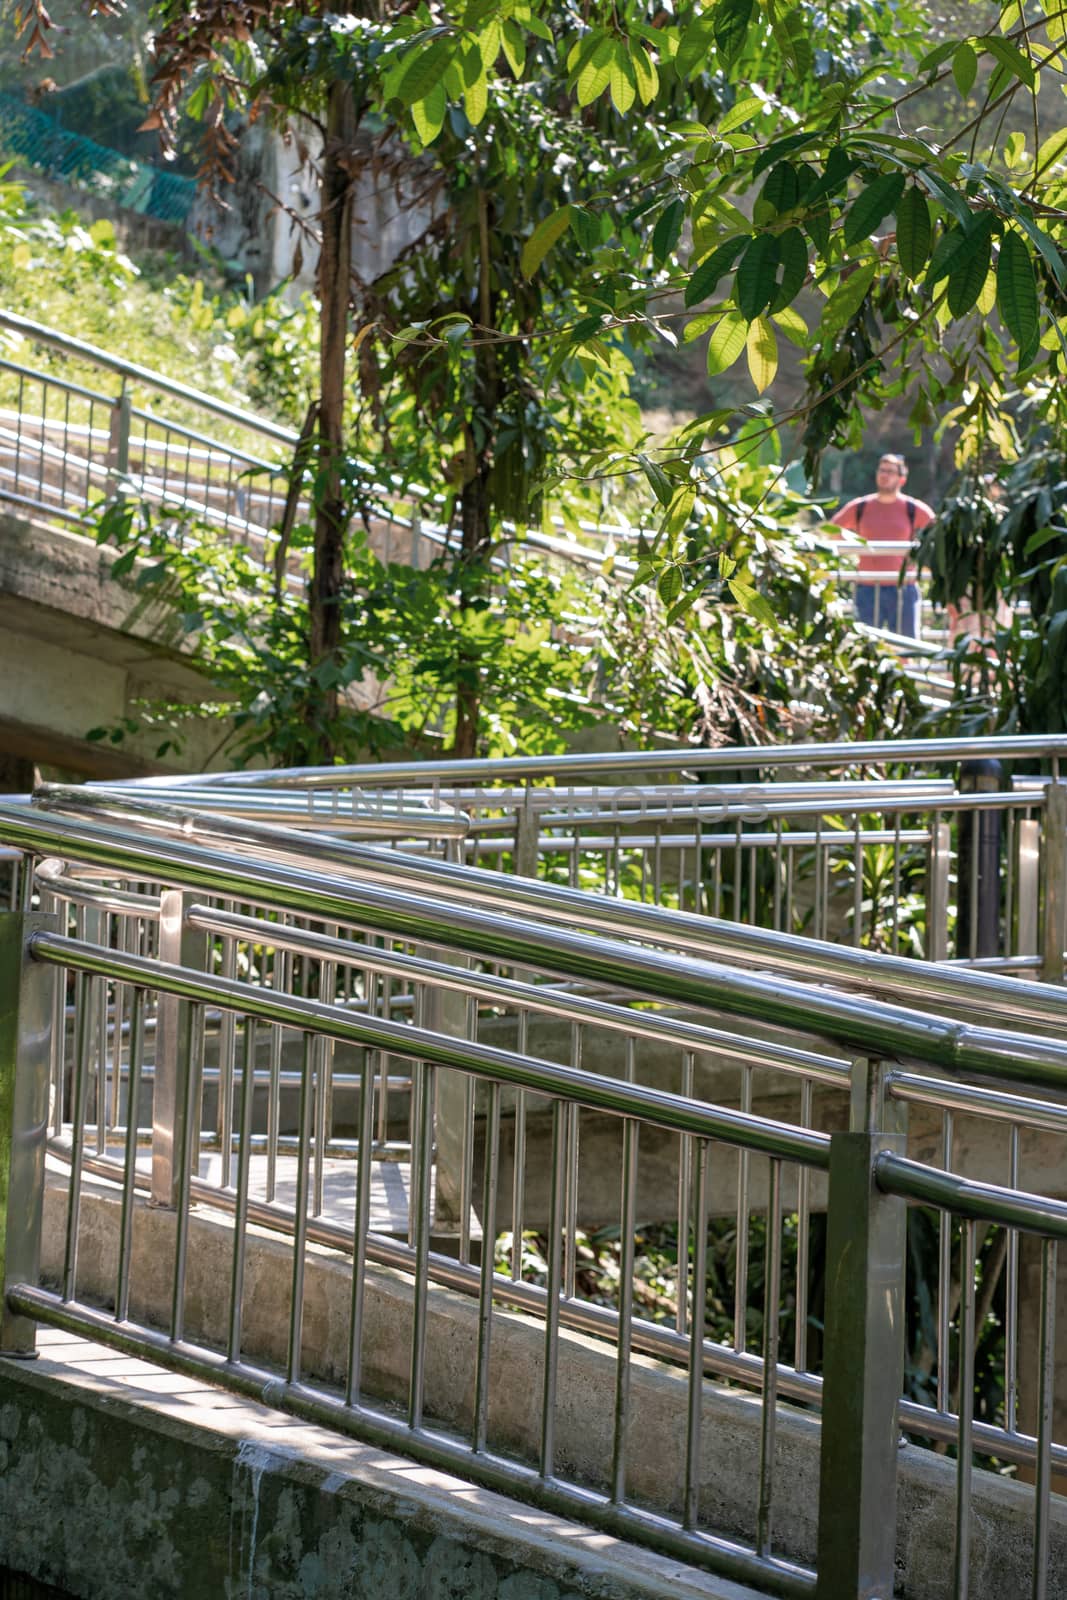 Stainless steel handrails, ramps in the city park. Leisure Park Architecture.